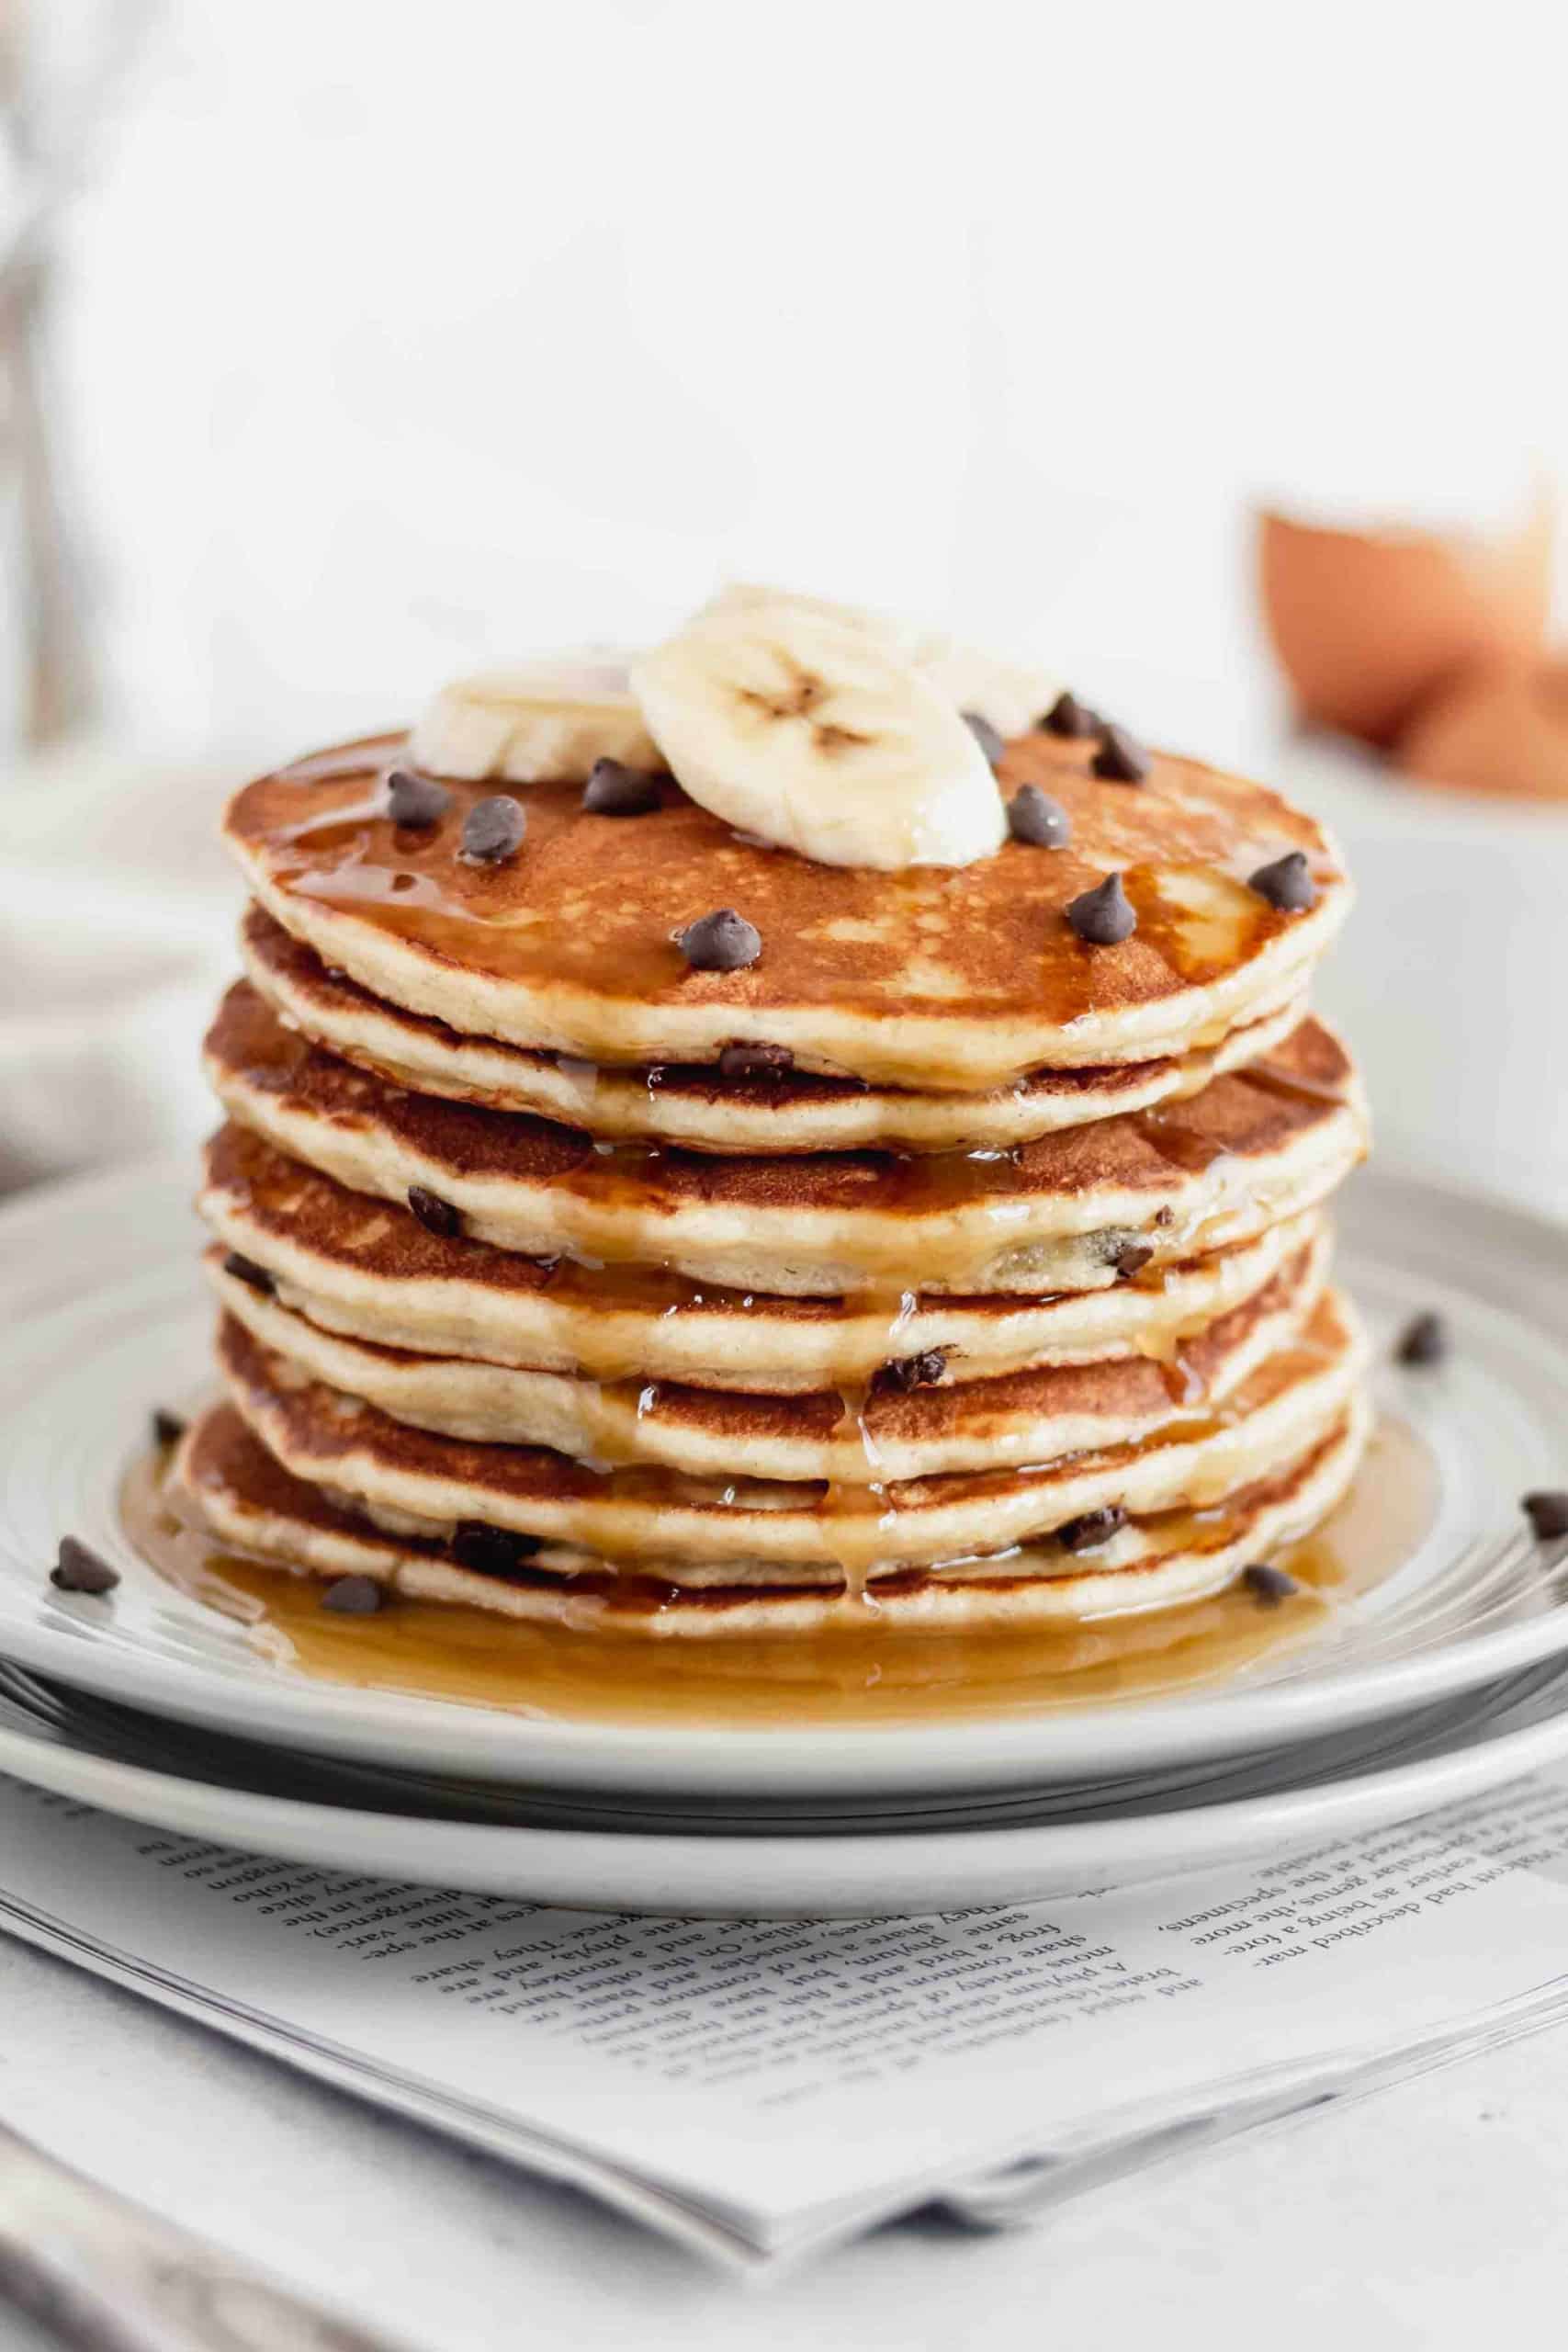 A stack of gluten free pancakes with slices bananas and chocolate chips on top, drizzled with maple syrup.